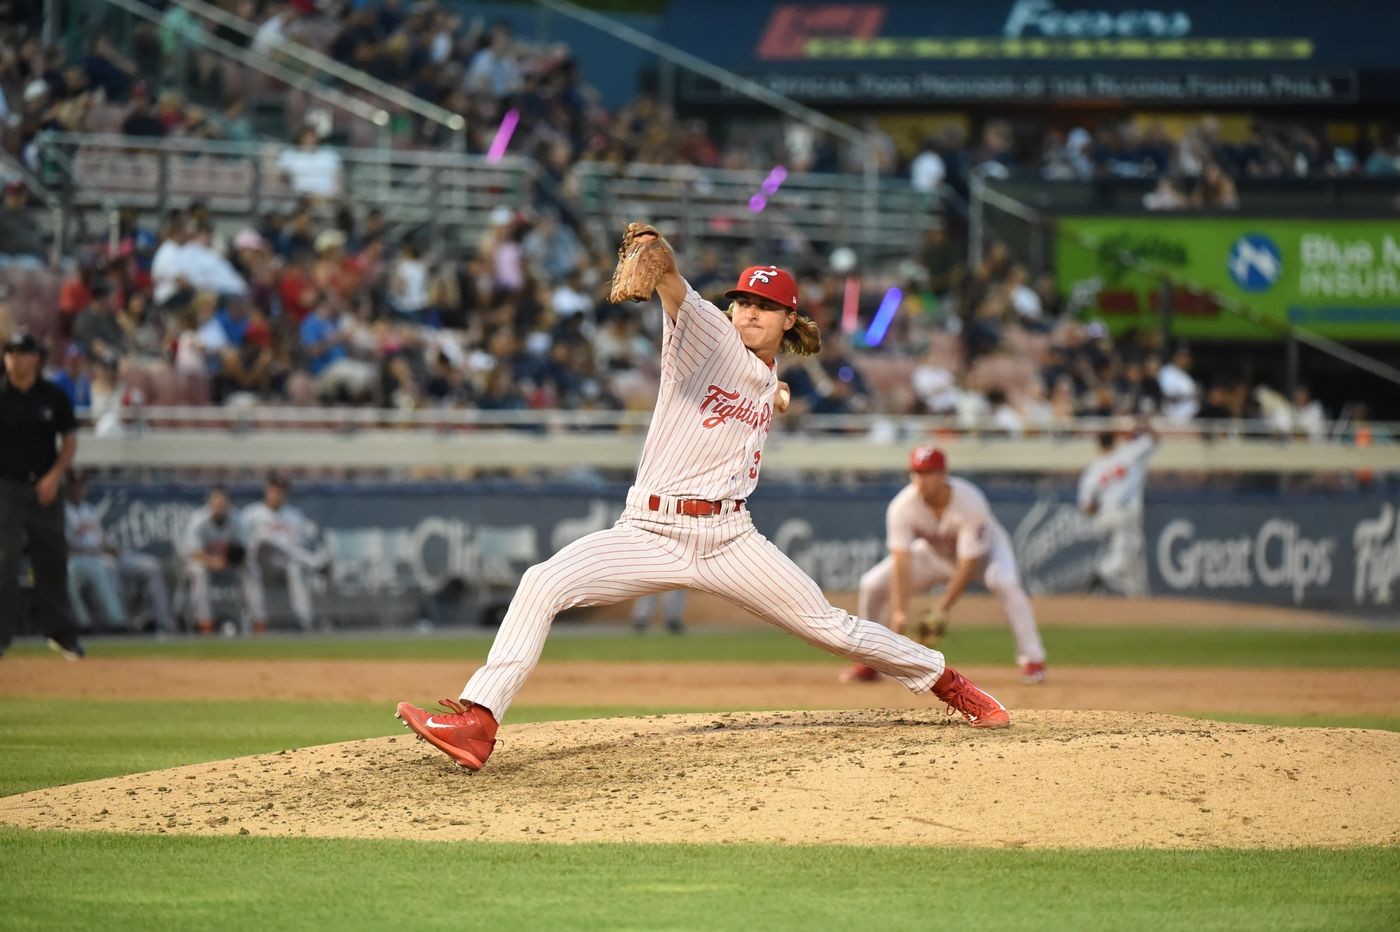 In double A, Phillies pitching prospect Kyle Dohy finds a challenge at last